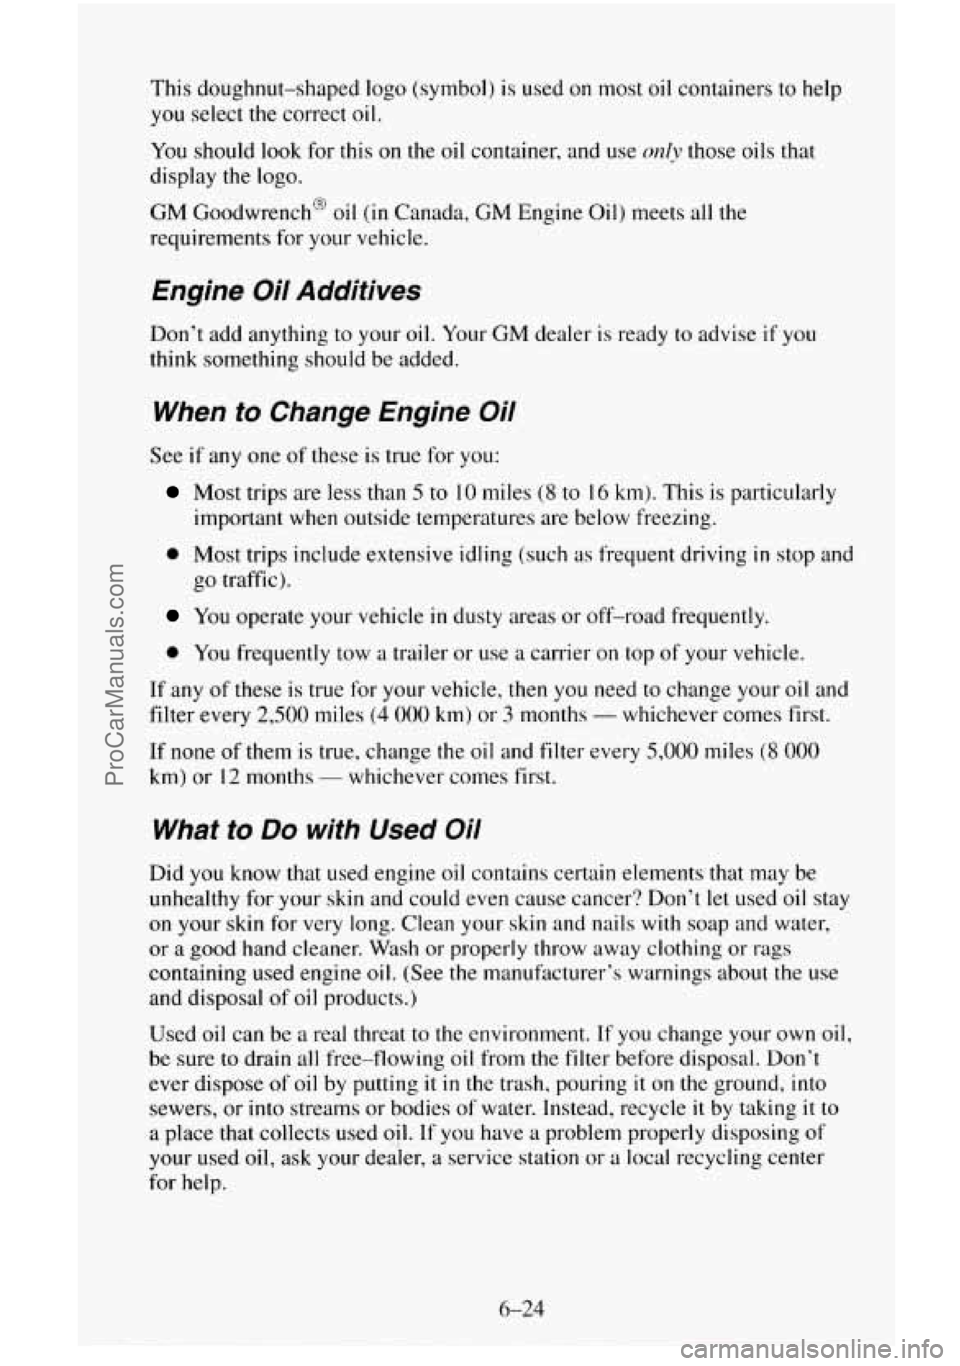 CHEVROLET SUBURBAN 1995  Owners Manual This doughnut-shaped  logo  (symbol) is used  on most oil containers  to  help 
you select the correct oil. 
You  should 
look for this on the oil container, and use only those  oils that 
display  th